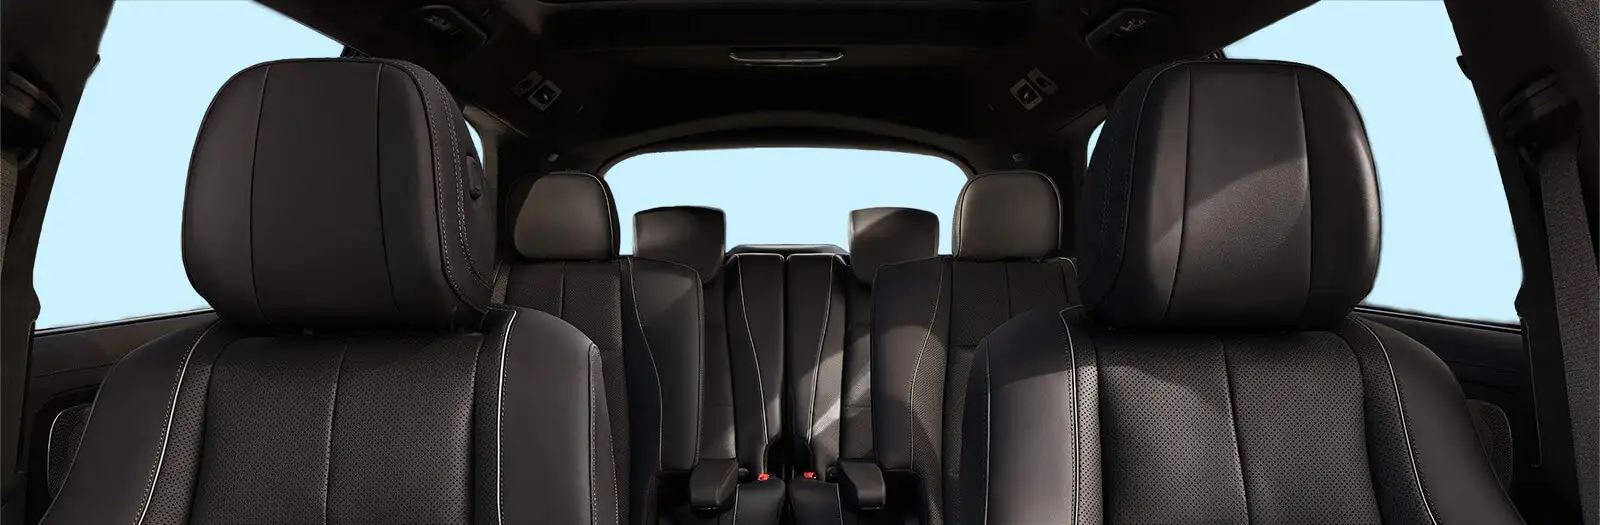 Back seats of an SUV